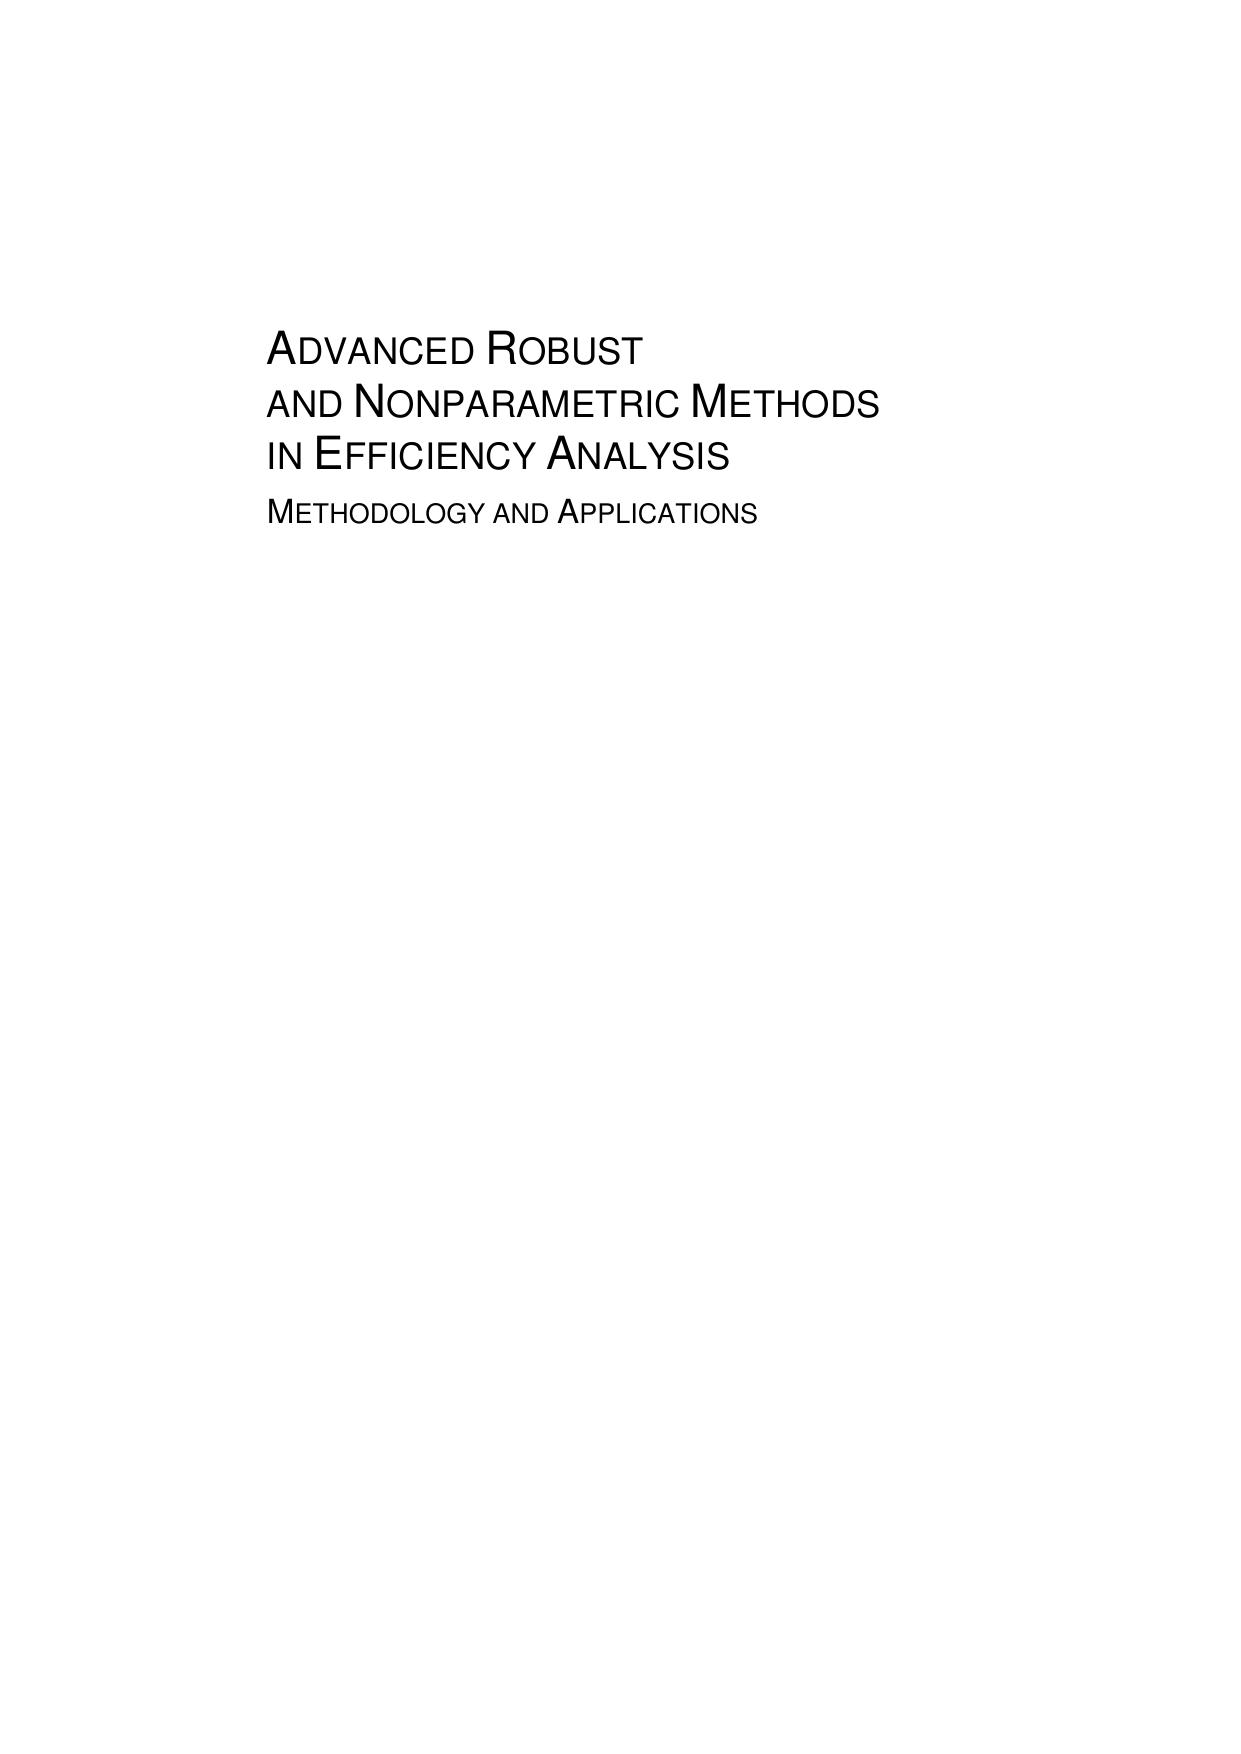 EFFICIENCY ANALYSIS METHODOLOGY AND APPLICATIONS  2007